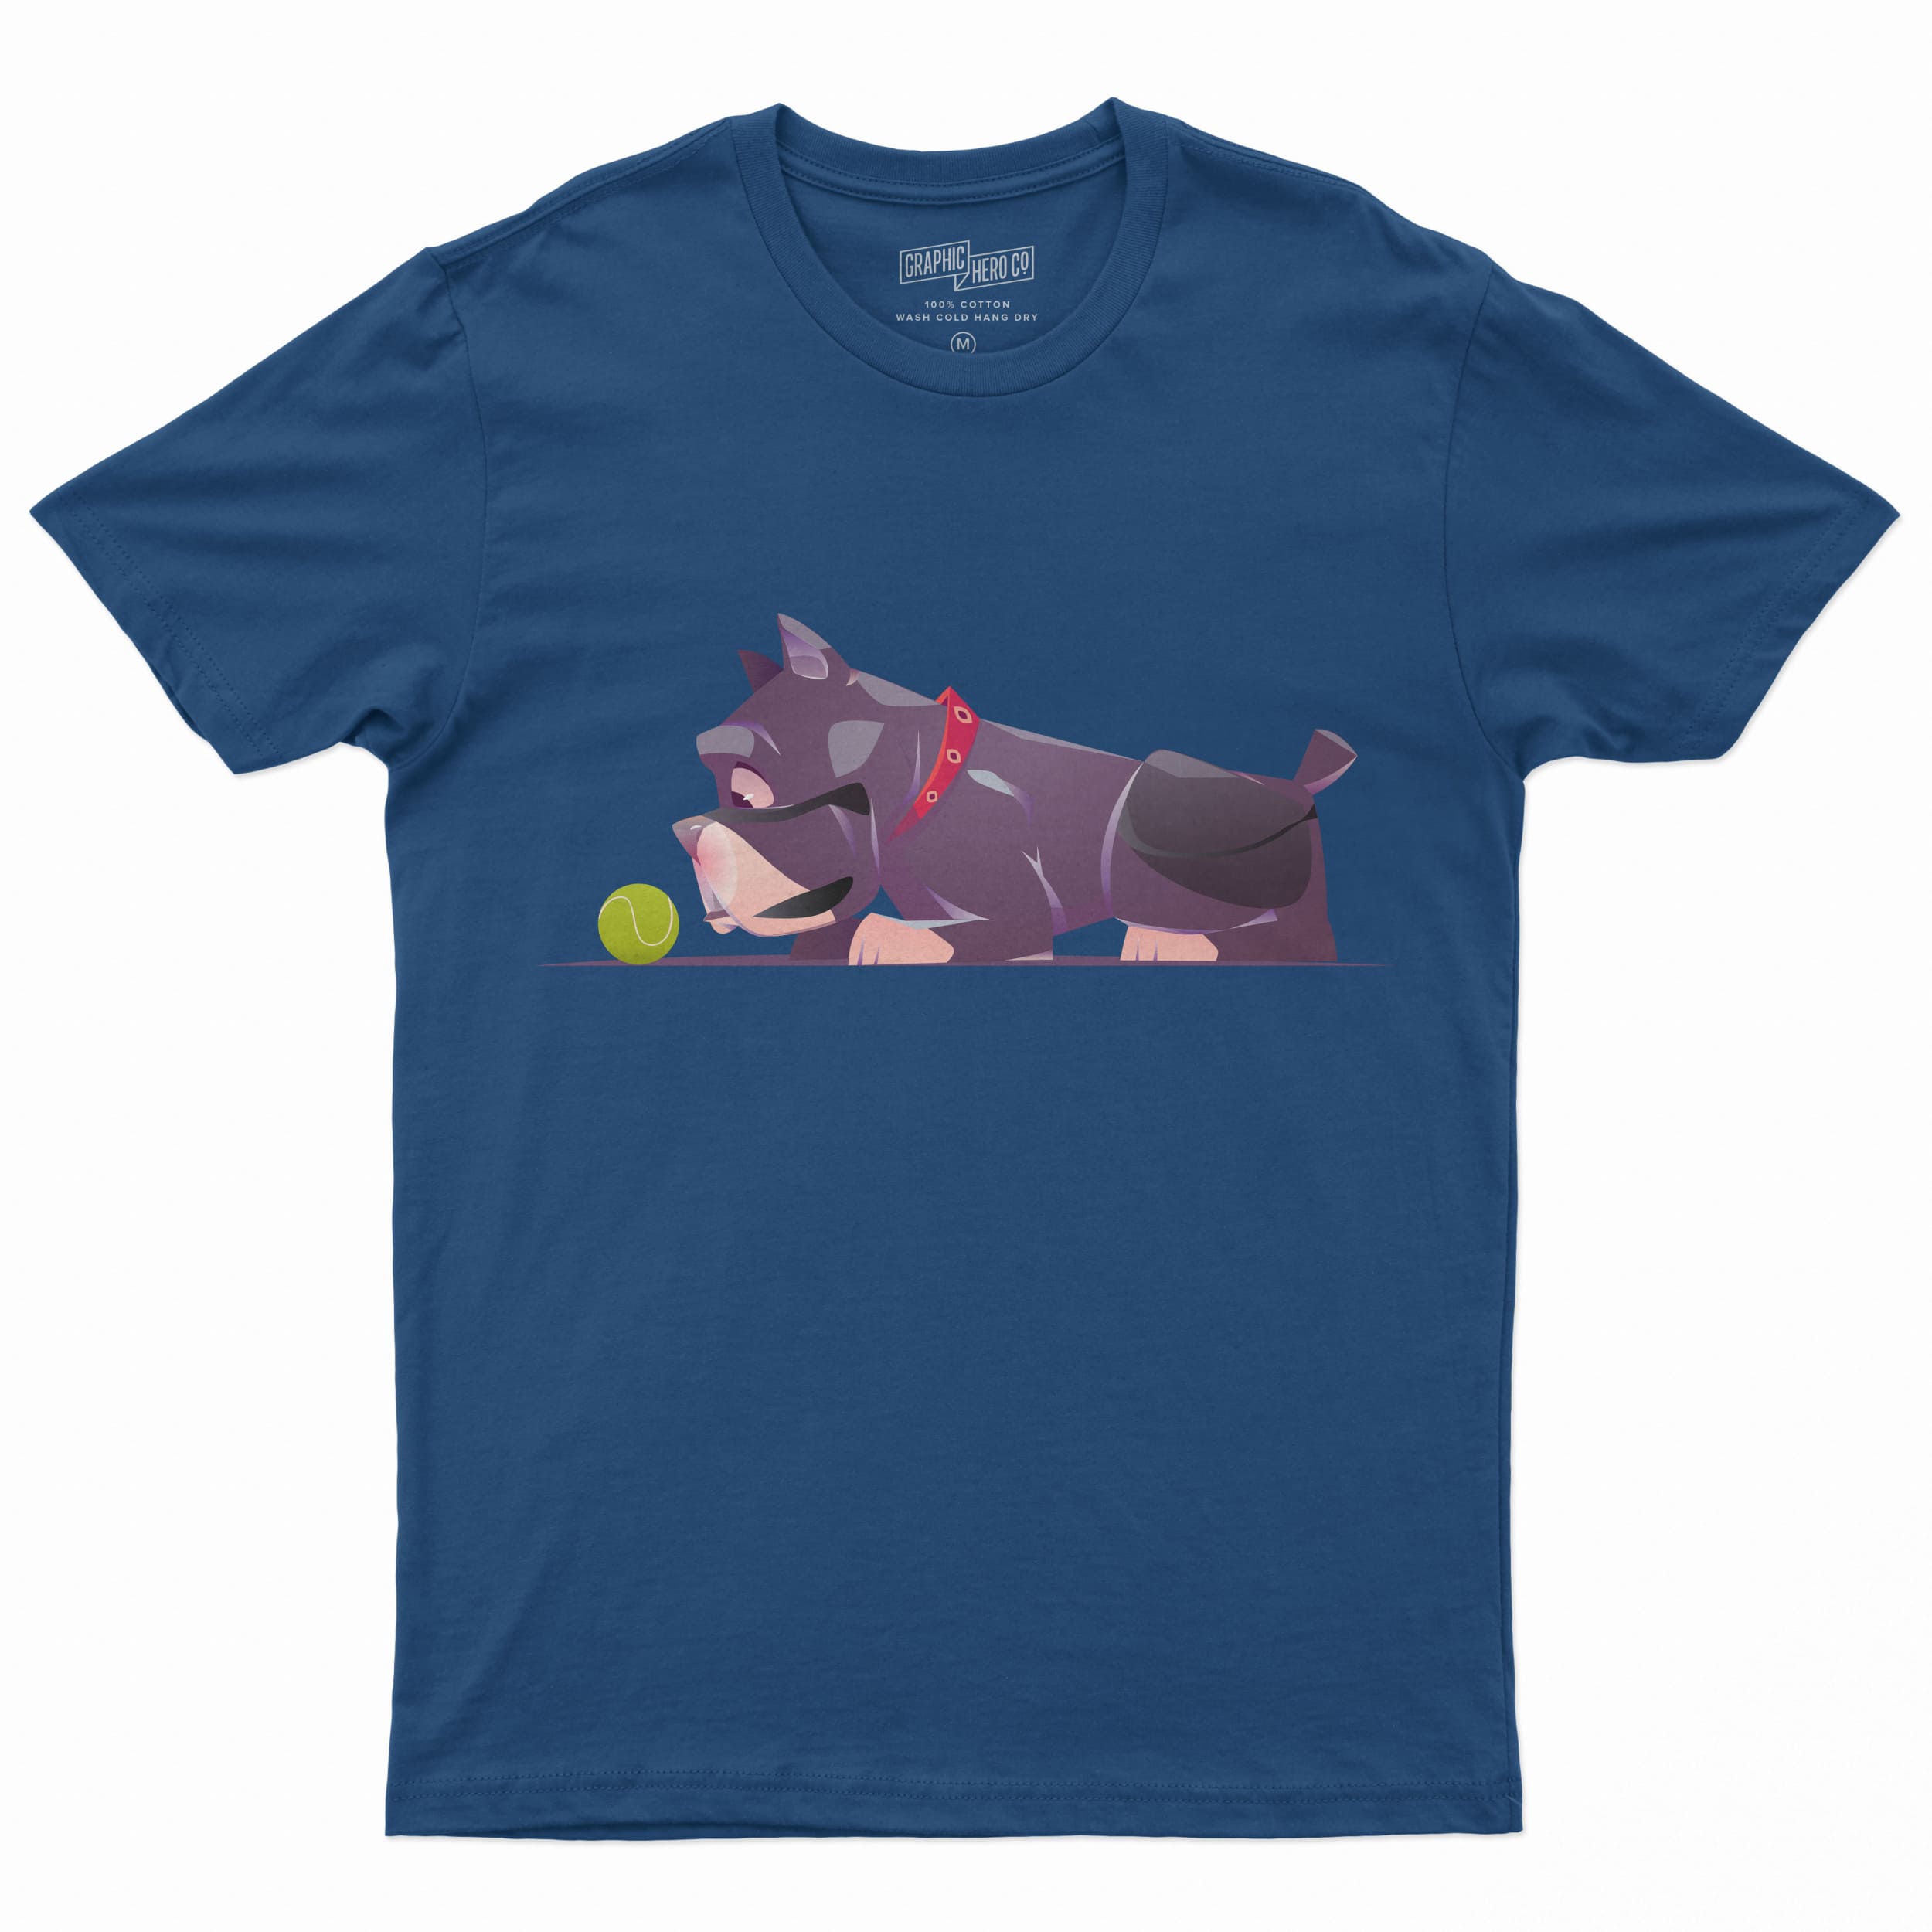 Dark blue t-shirt with a black pitbull on a white background.